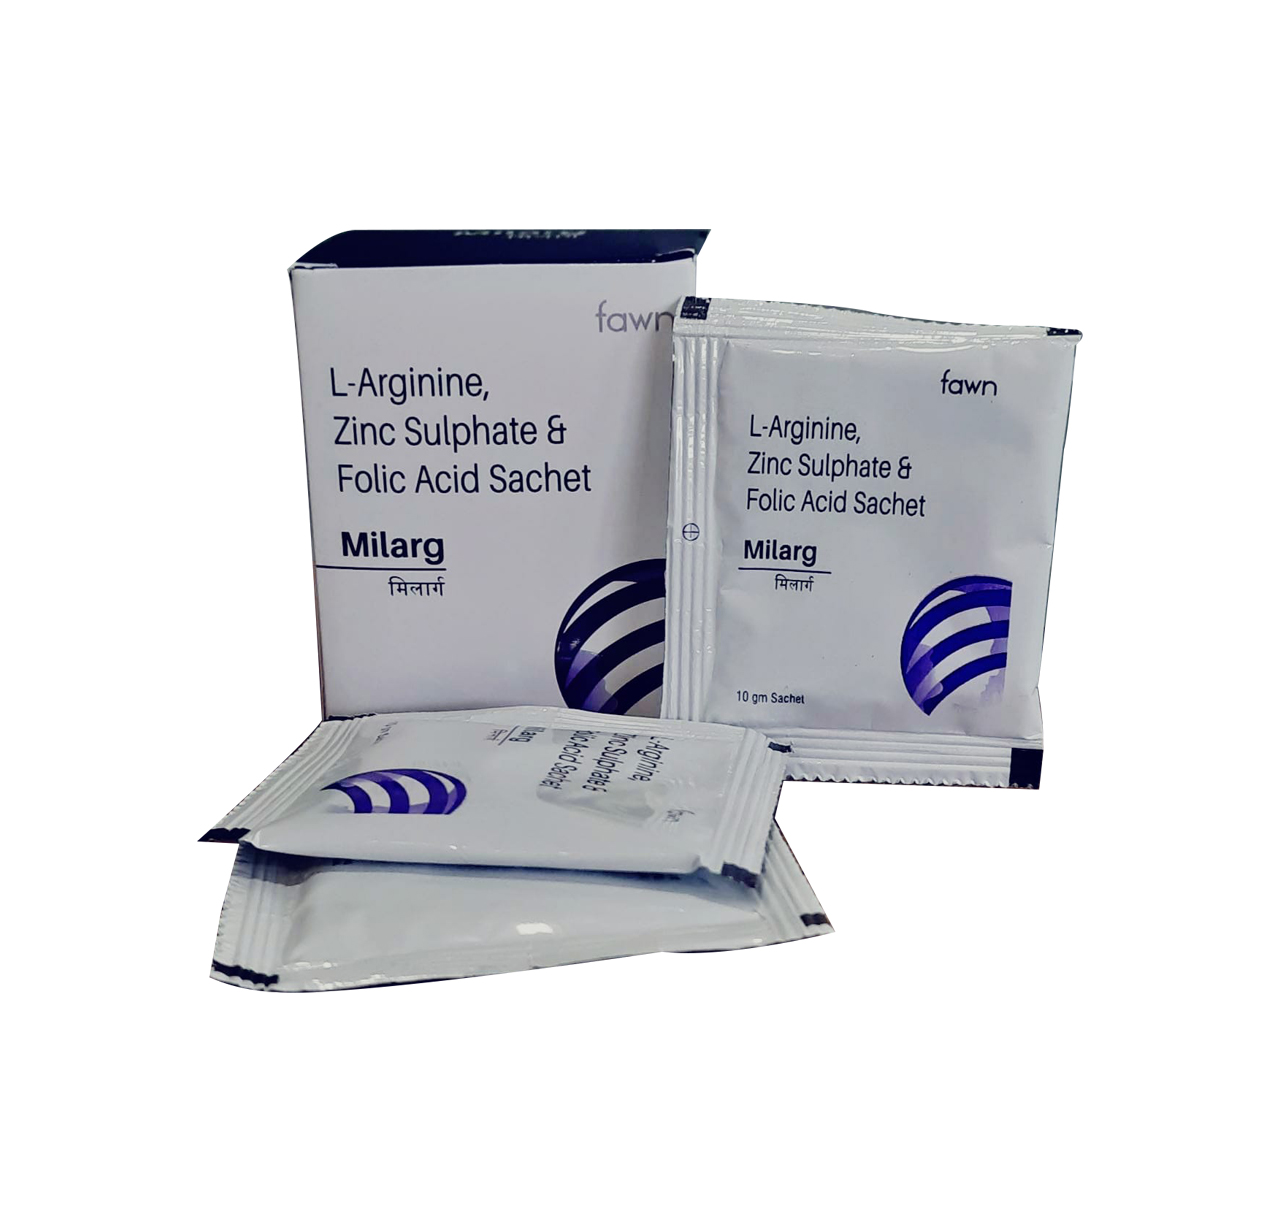 Product Name: Milarg, Compositions of L-Arginine + Folic Acid + Zinc are L-Arginine + Folic Acid + Zinc - Fawn Incorporation